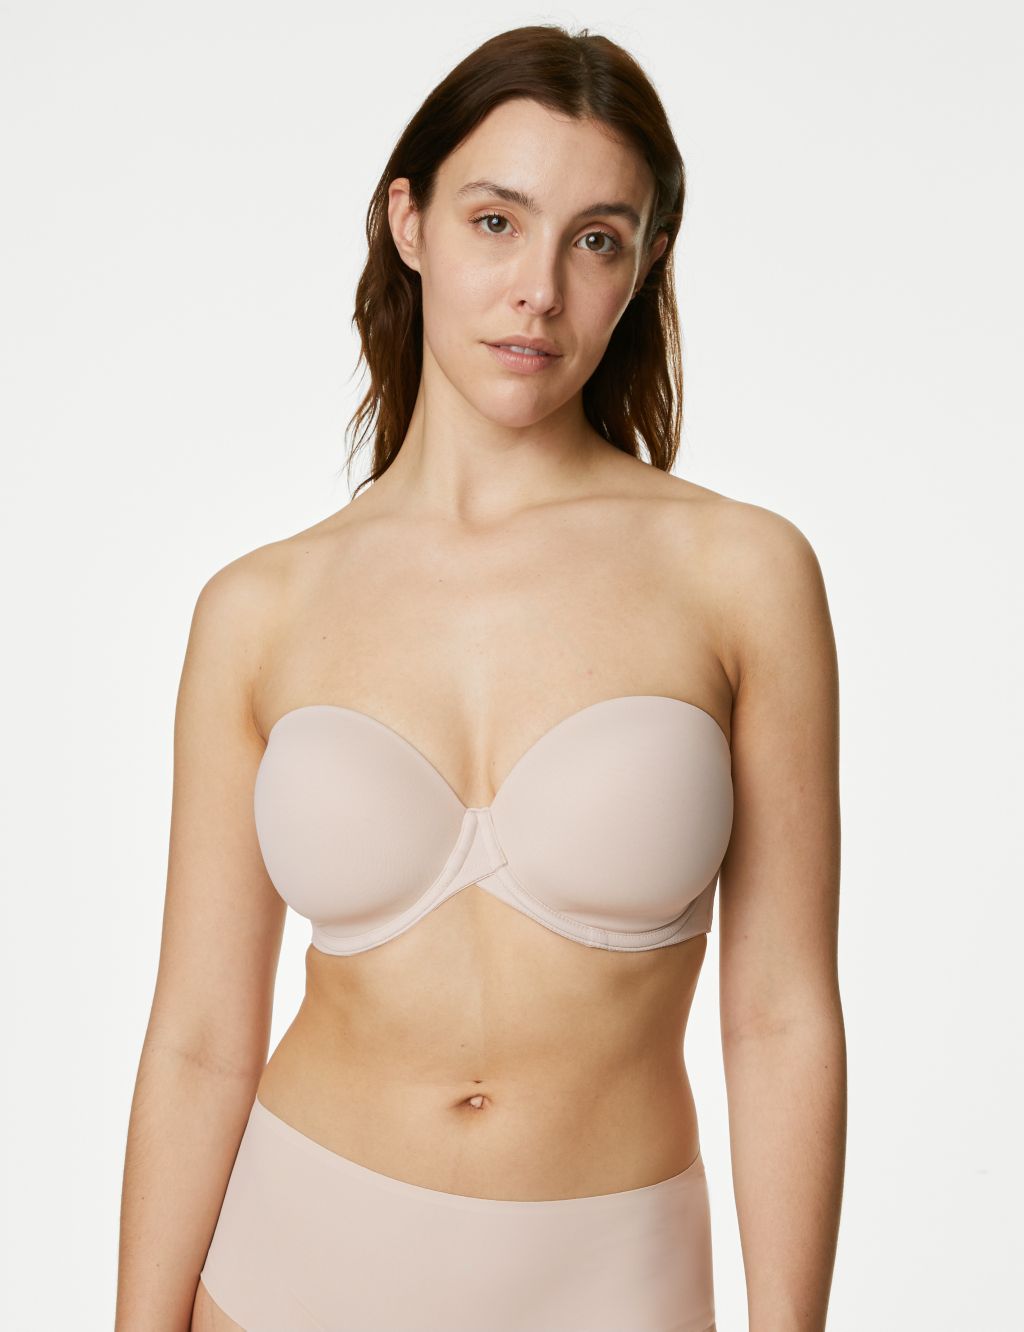 All My Bra Reviews in One Post – ThirdLove, Lively, Target, Uniqlo